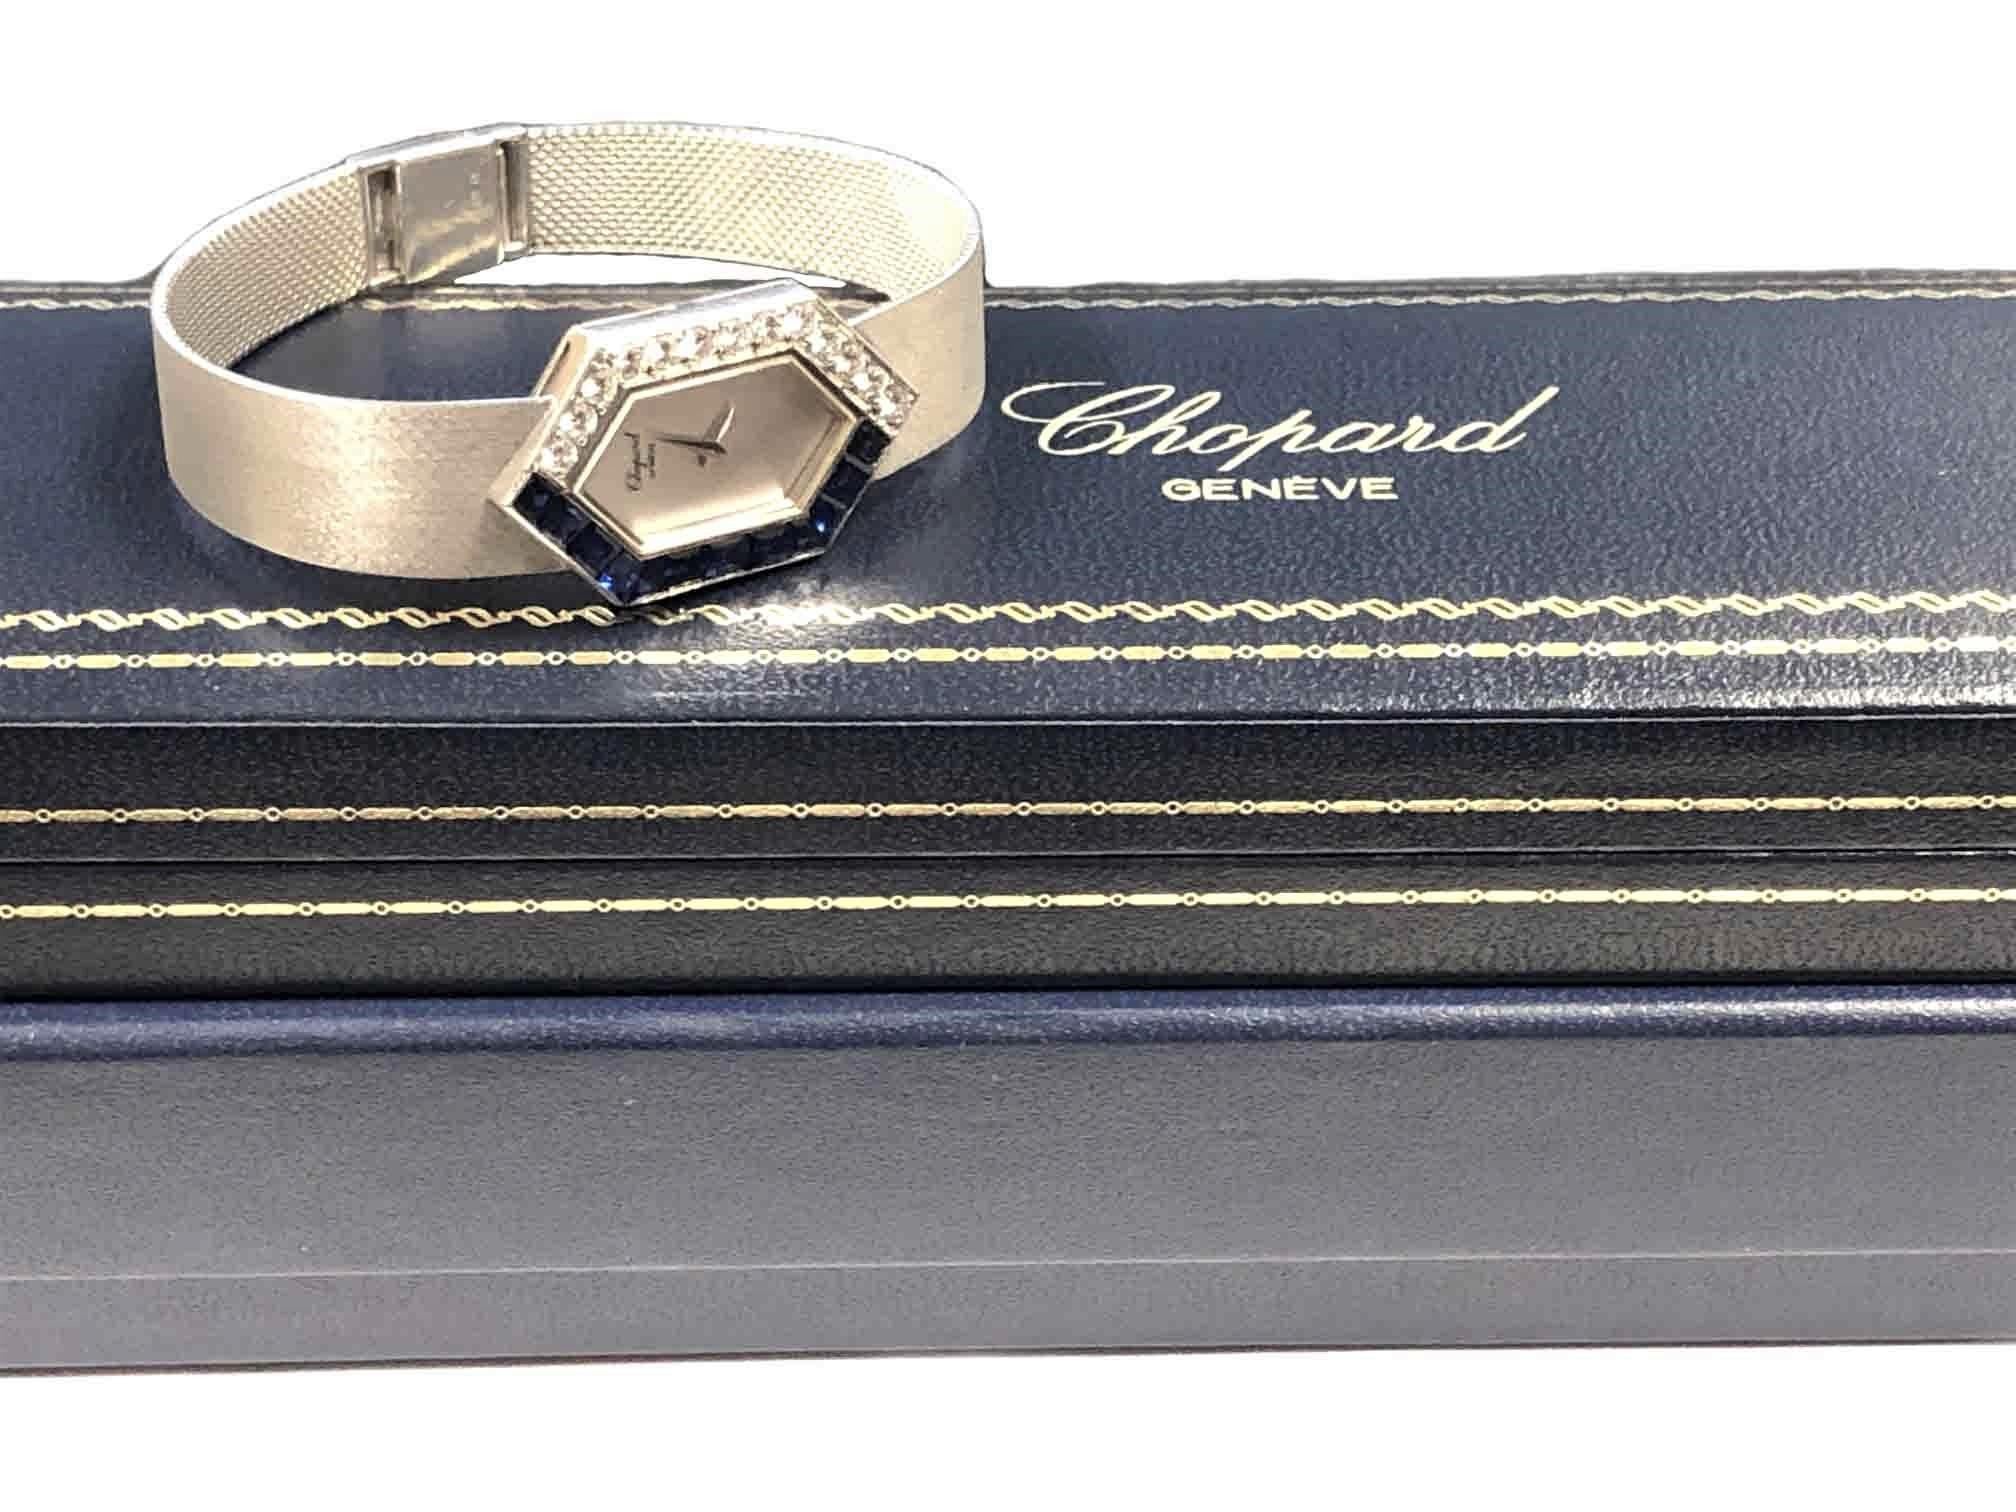 Circa 1990 Chopard Ladies Wrist Watch, 31 X 19 M.M. 2 Piece 18K White Gold case, bezel set with Round Brilliant cut Diamonds totaling 1.50 Carats and Grading as F - G in color and VS in Clarity and further set with very fine step cut Sapphires. 17